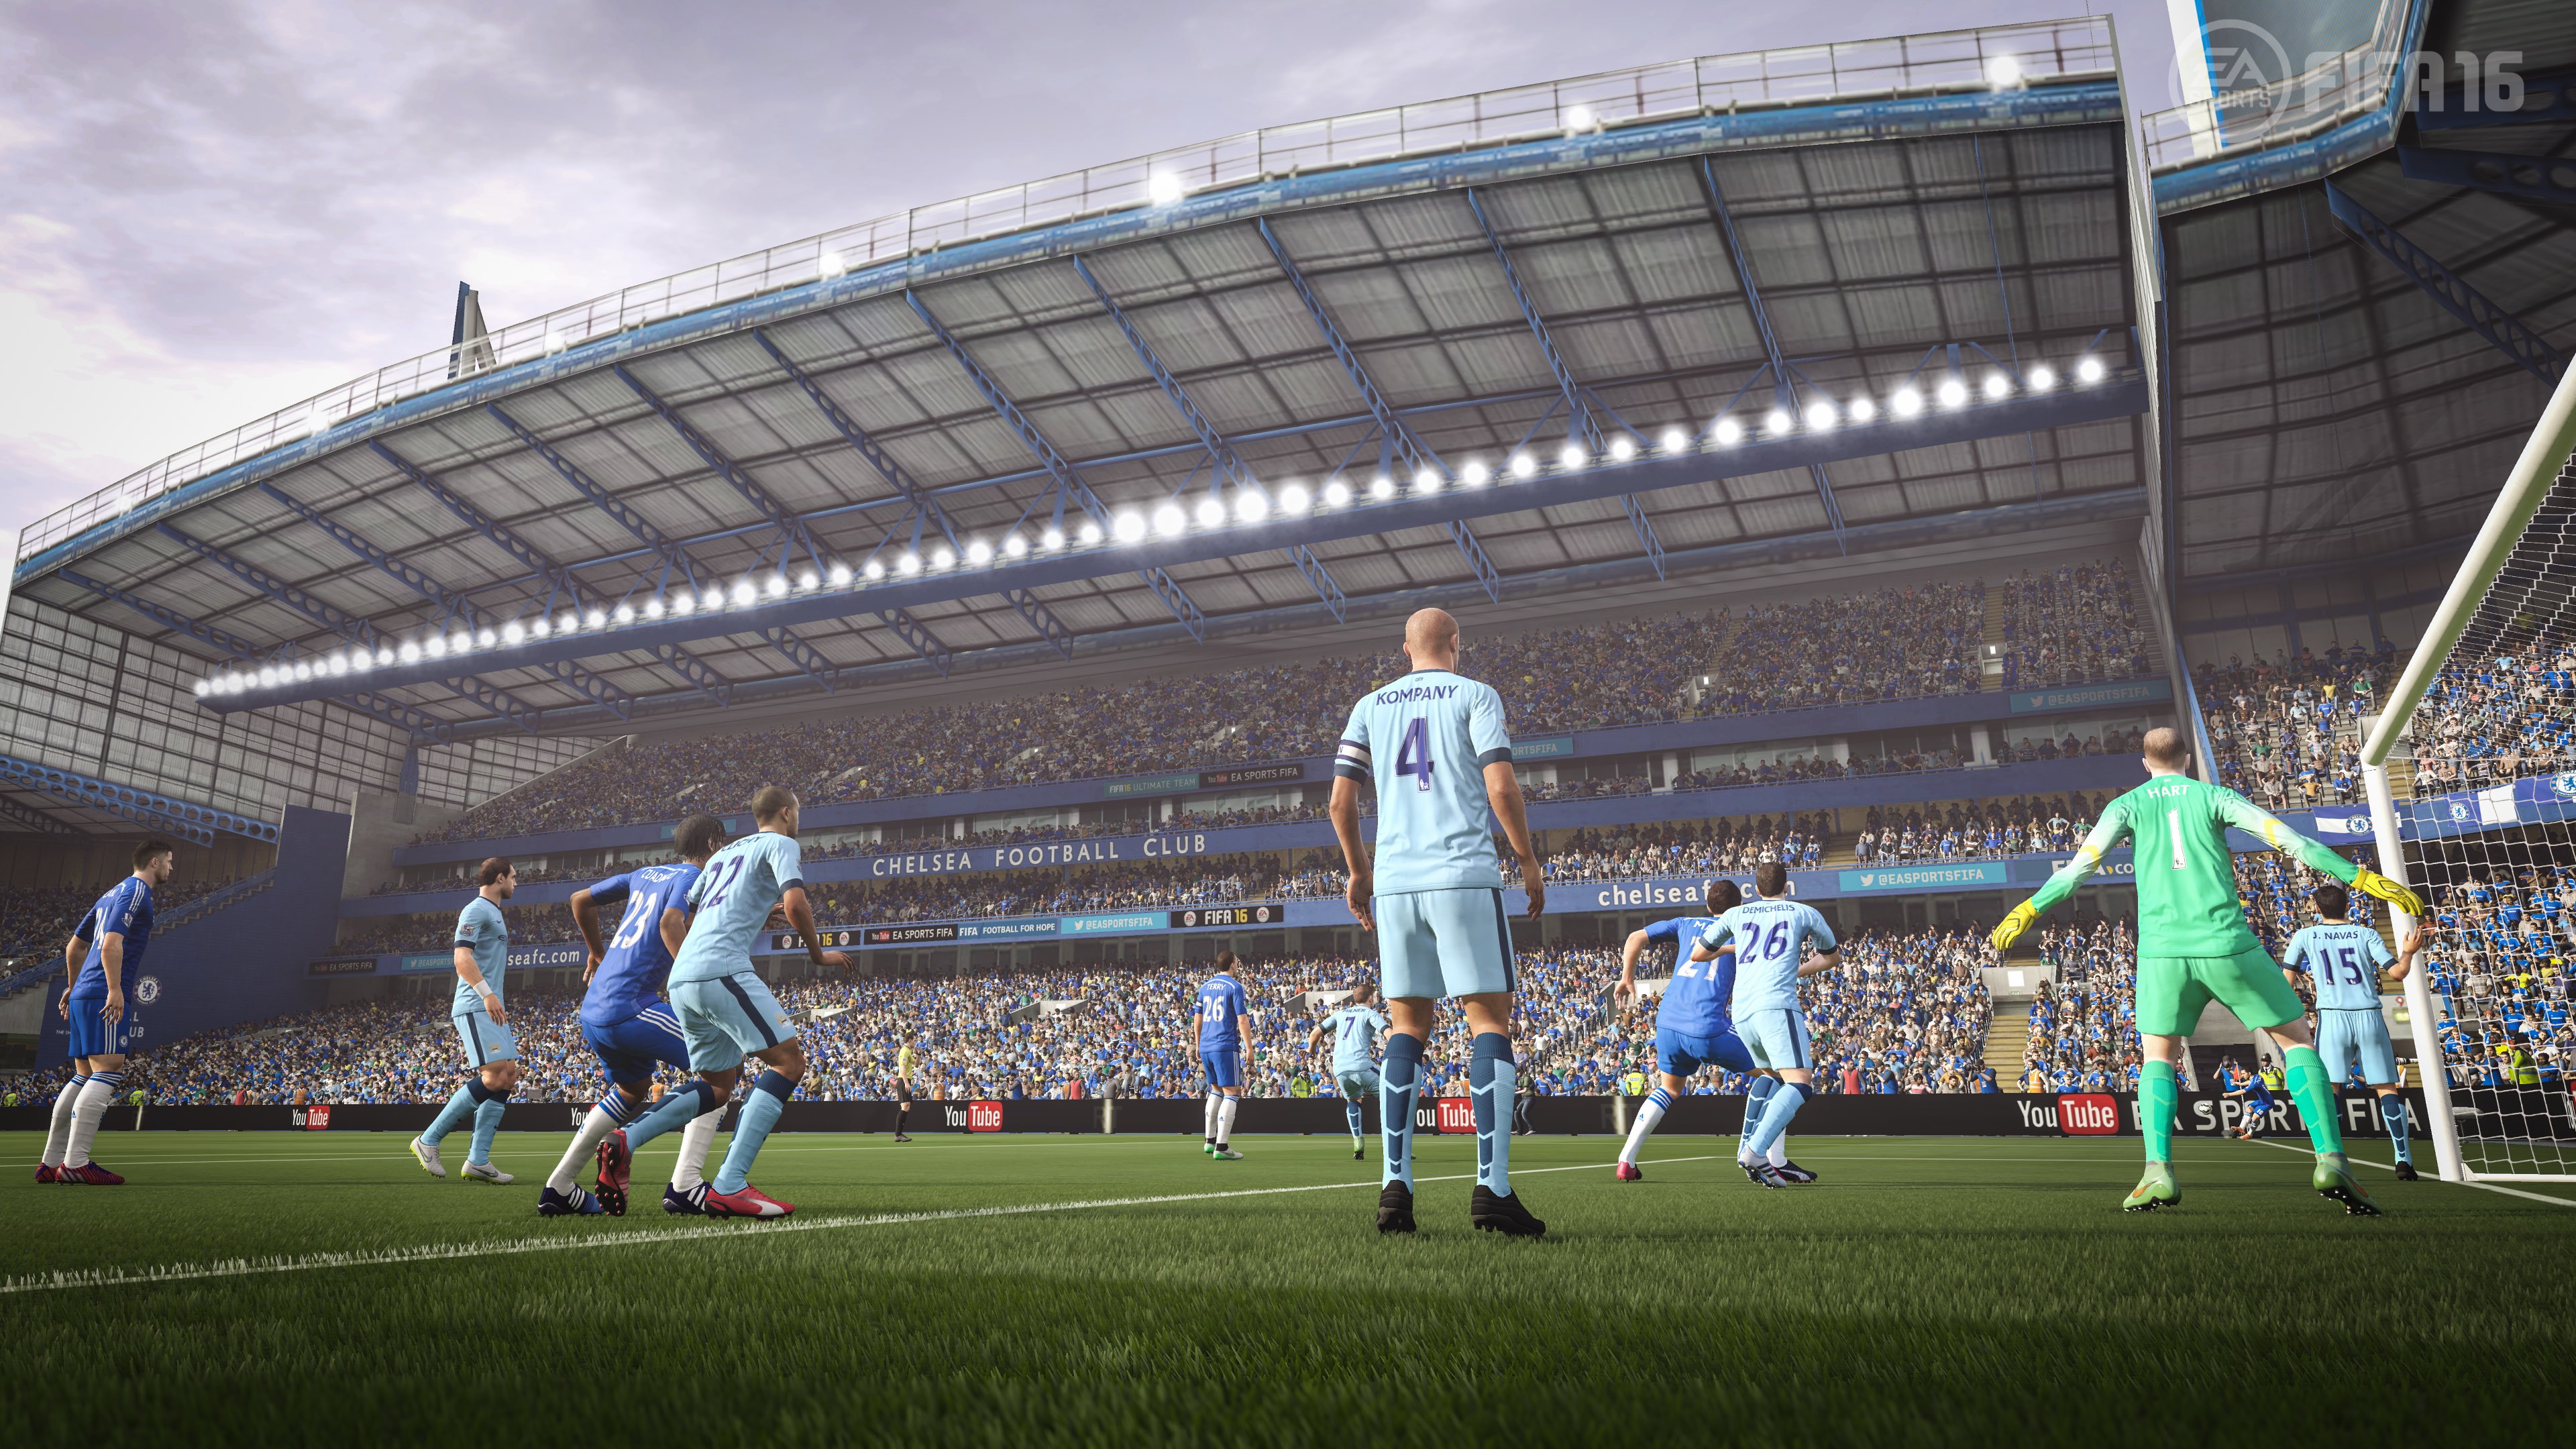 Fifa 16 HD Wallpapers 4K Wallpapers 3840x2160